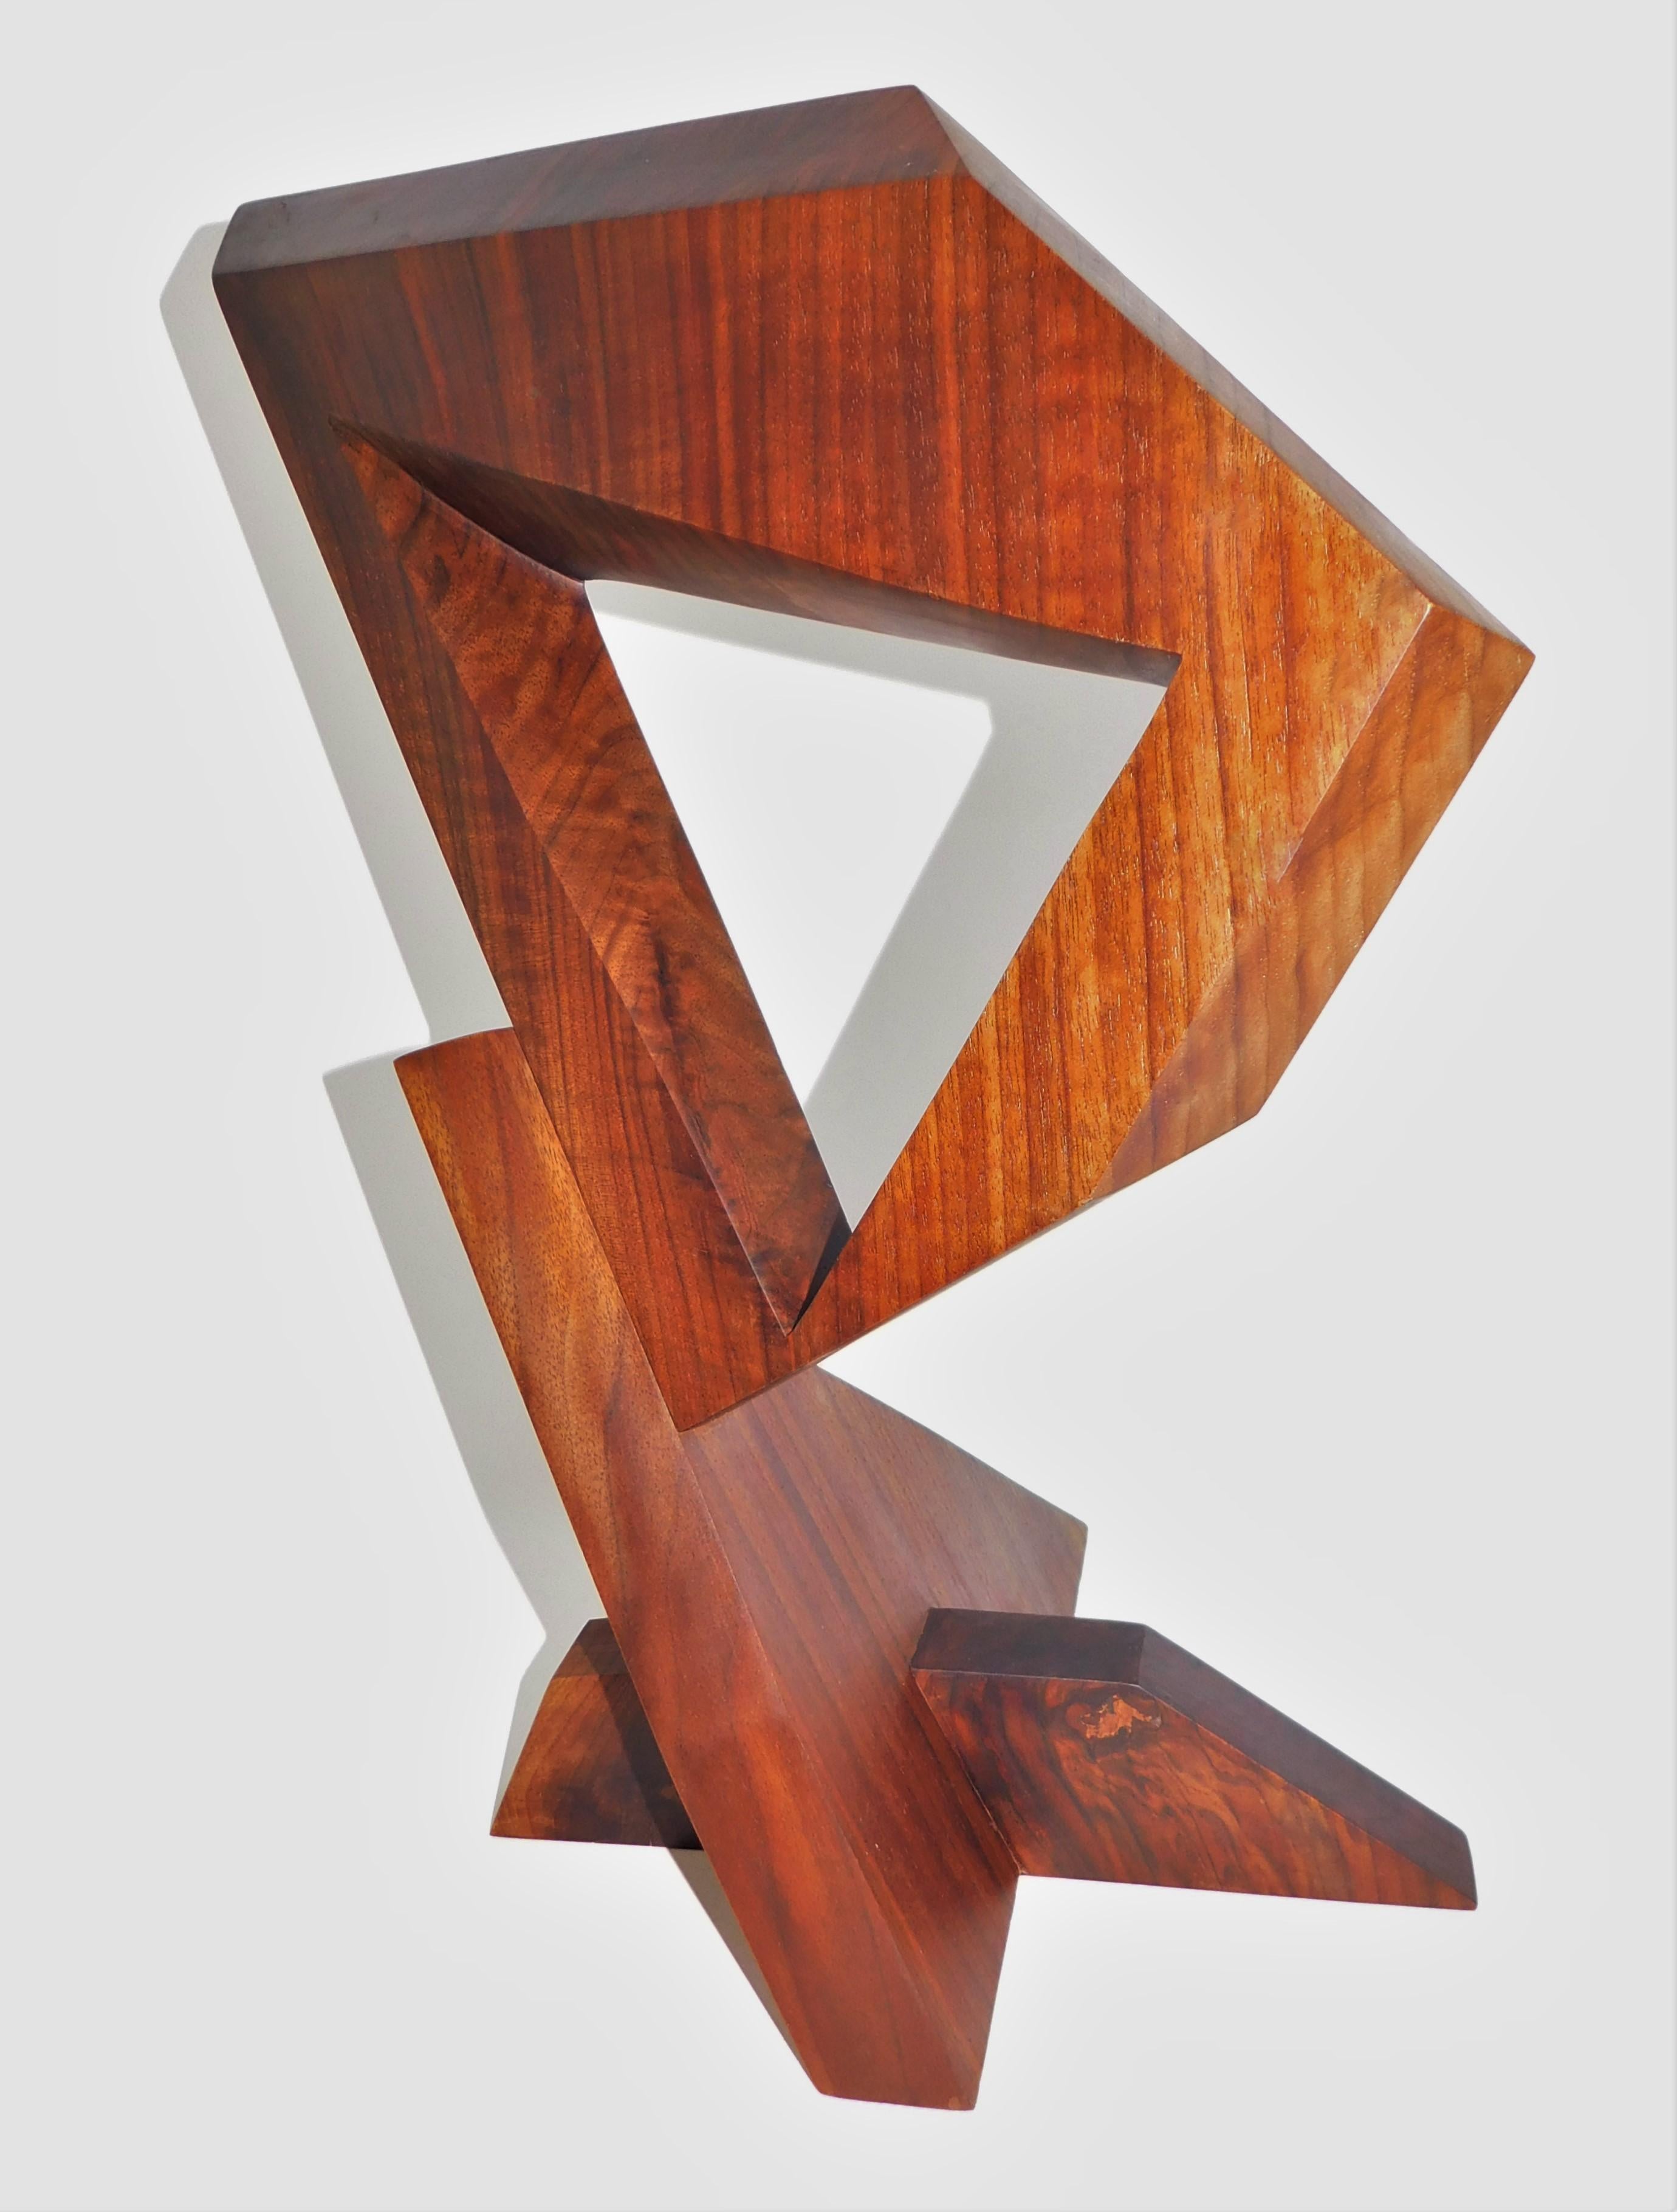 This contemporary abstract wooden sculpture is by Czeslaw Budny in constructivist style circa 2022. This unique sculpture is made of recycled walnut. Budny utilizes the simplicity of shapes such as the cube, circle and triangle to create modern